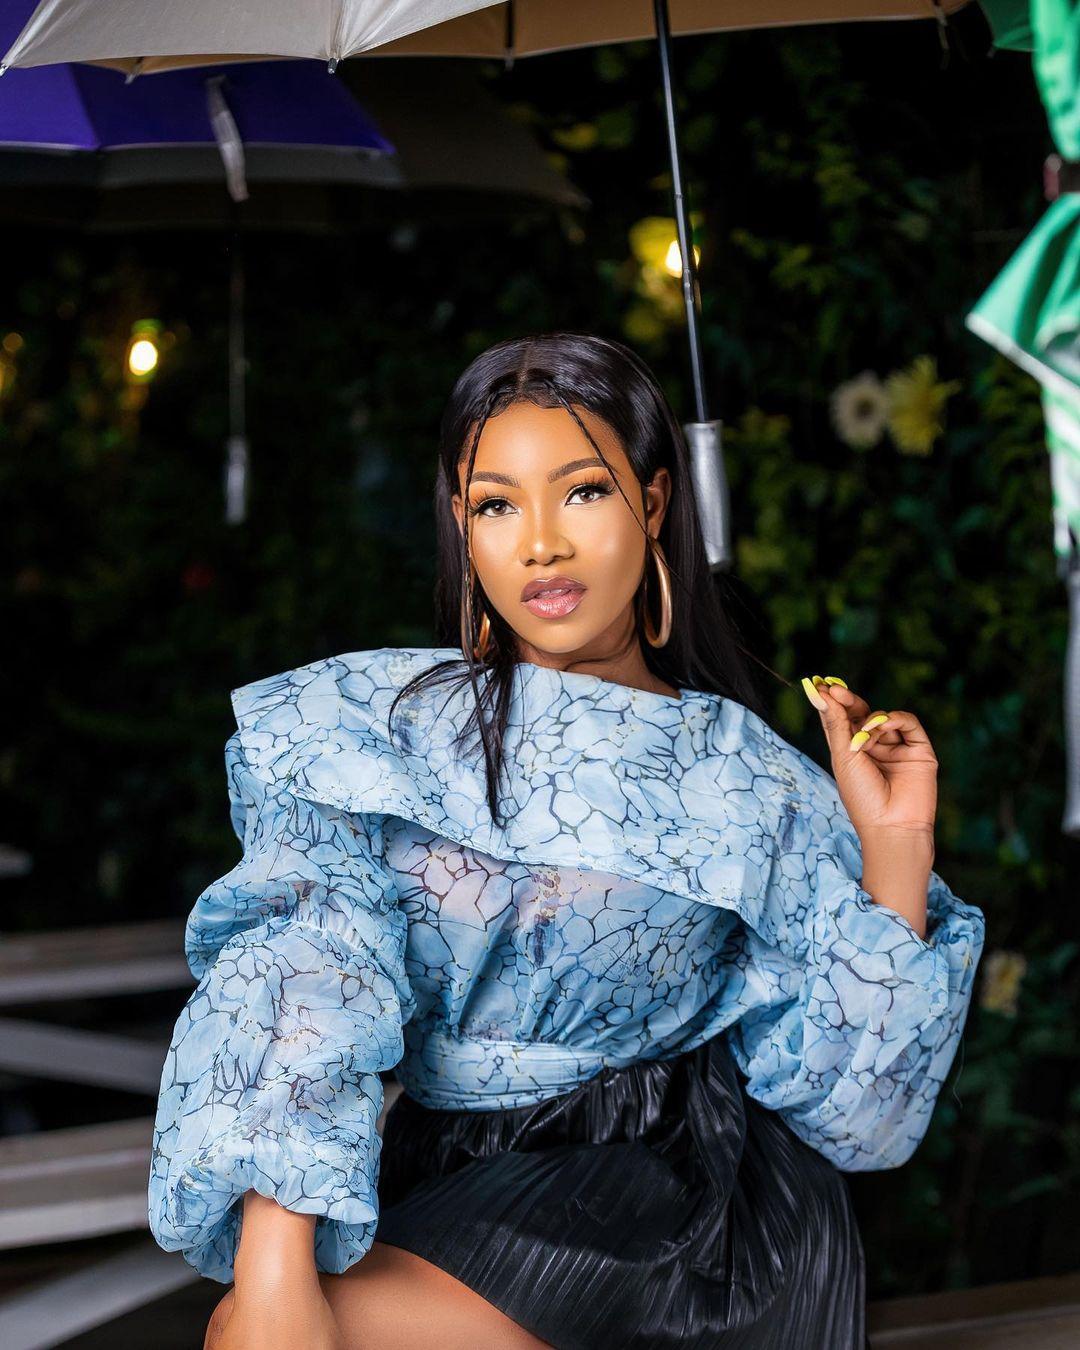 My profile rose after disqualification from BBN – Tacha